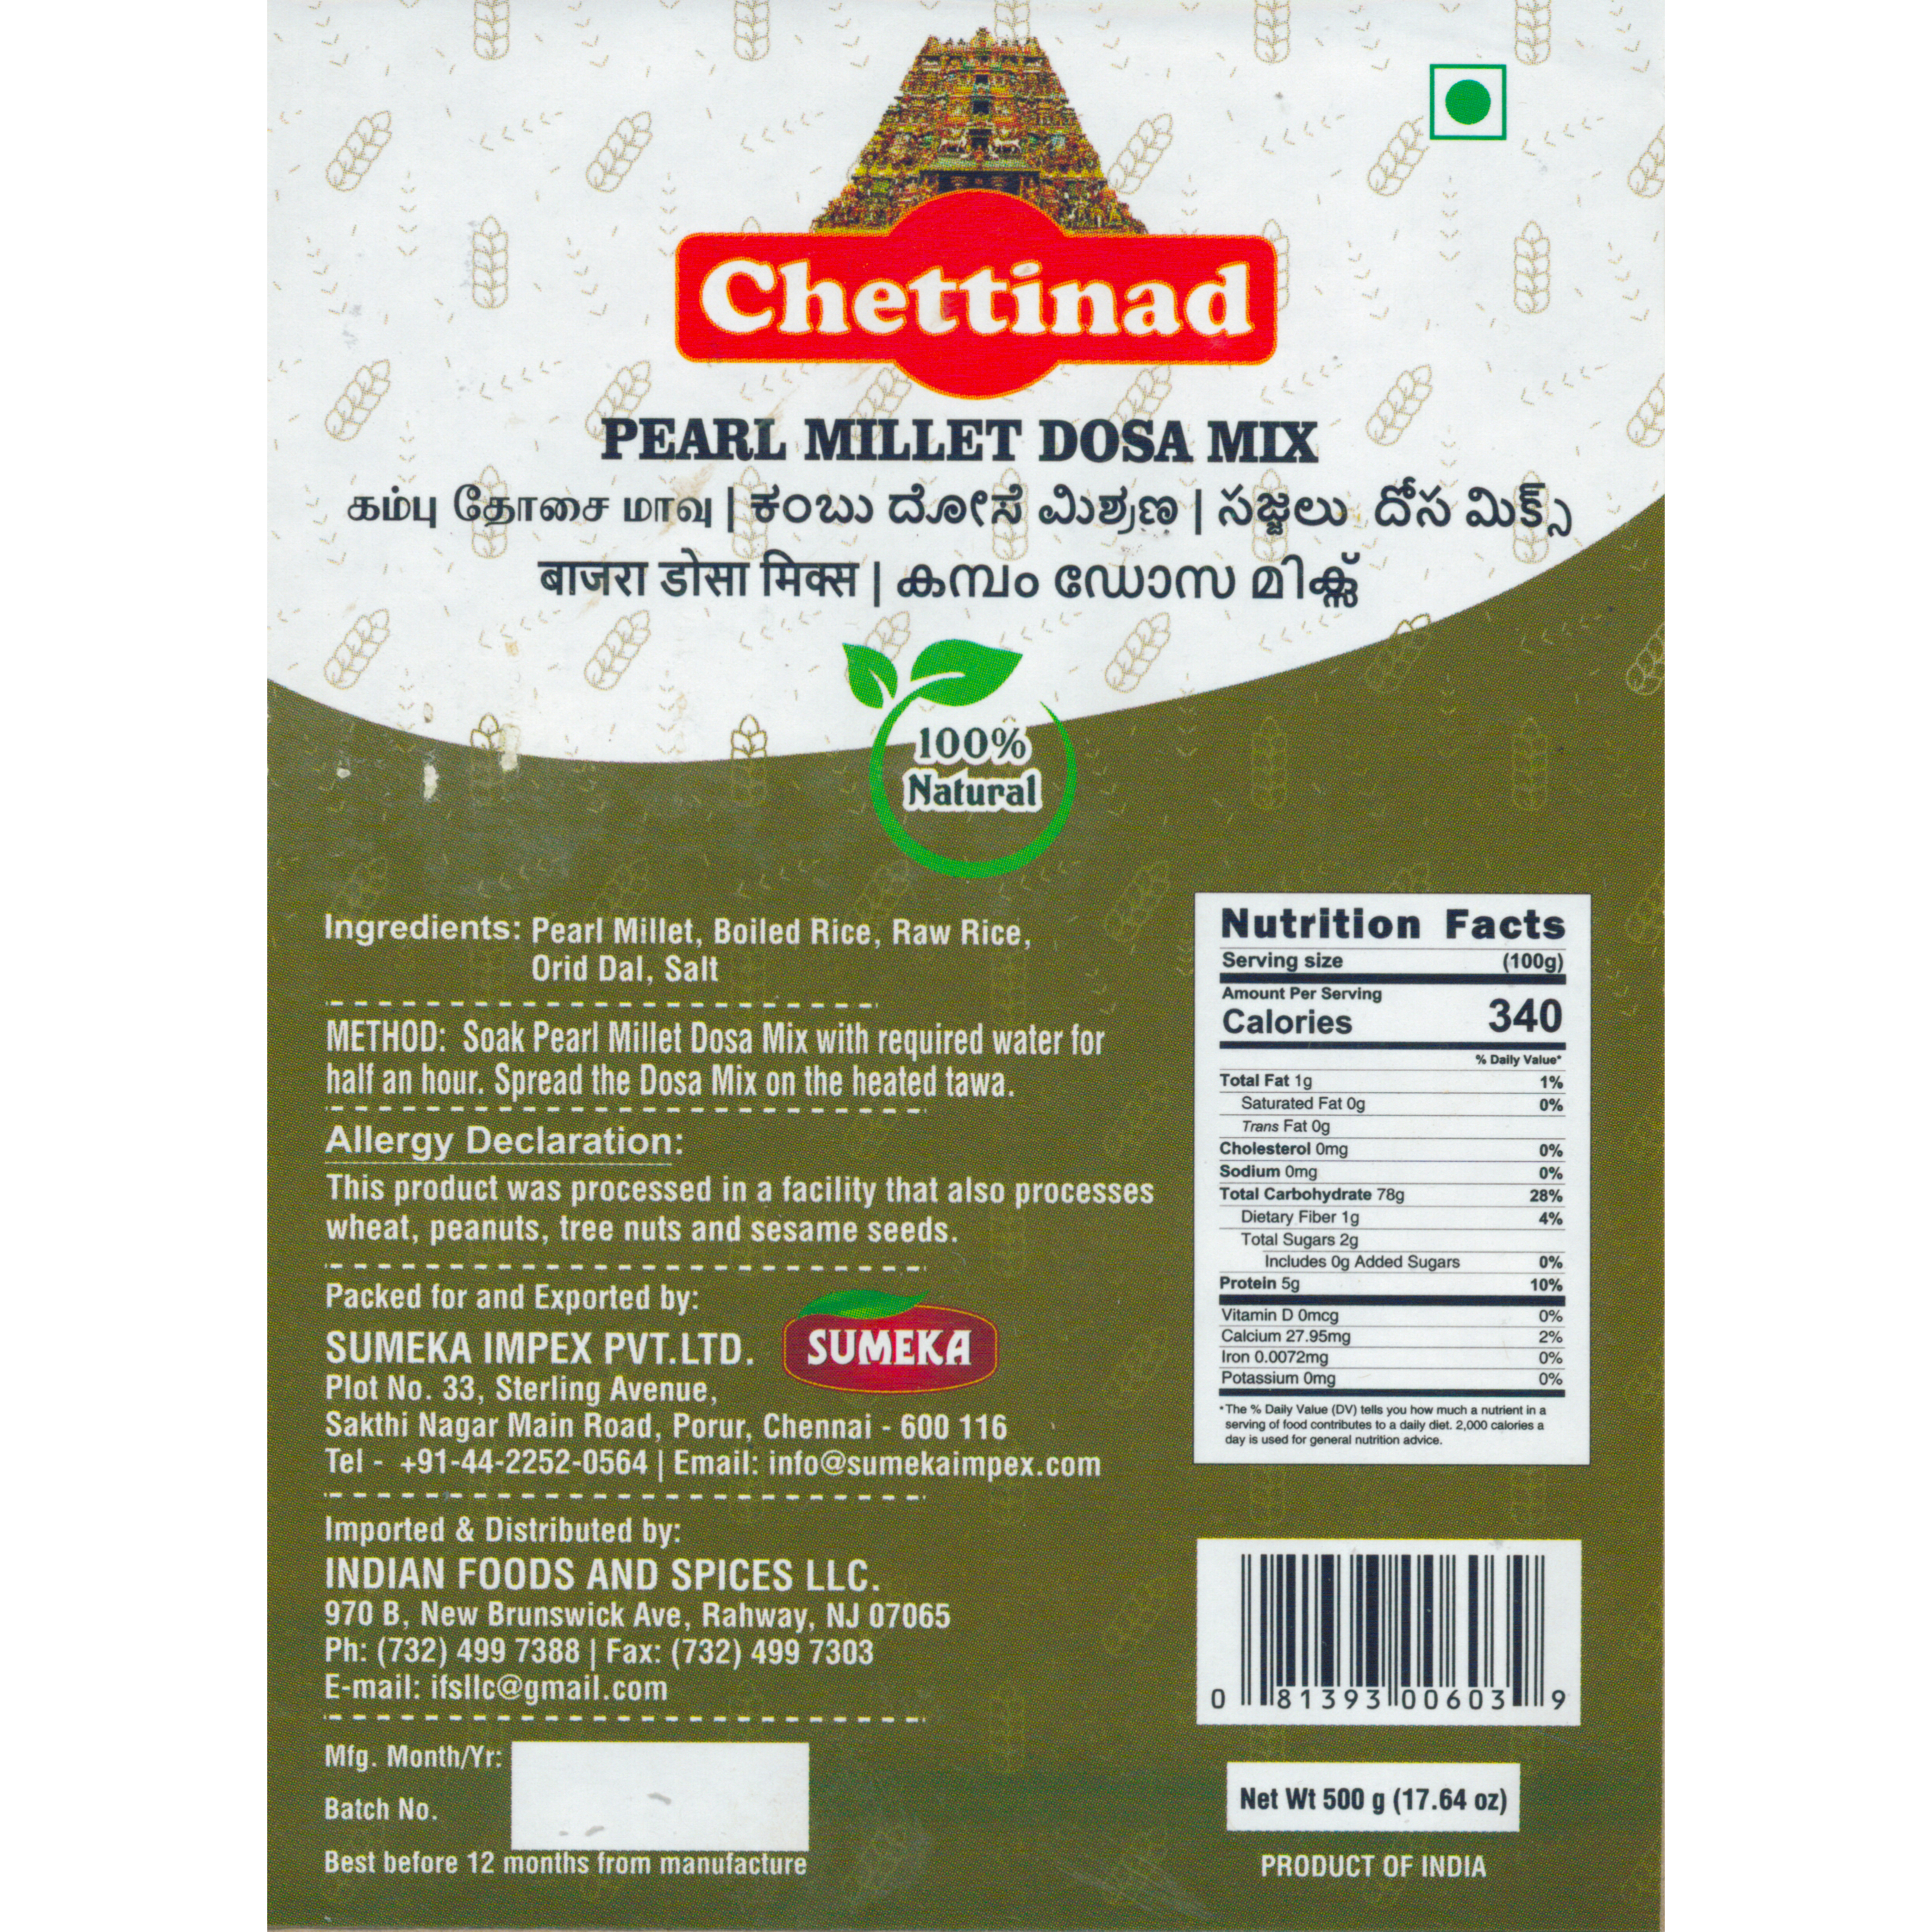 Pack of 2 - Chettinad Pearl Millet Dosa Mix - 500 Gm (1.1 Lb)